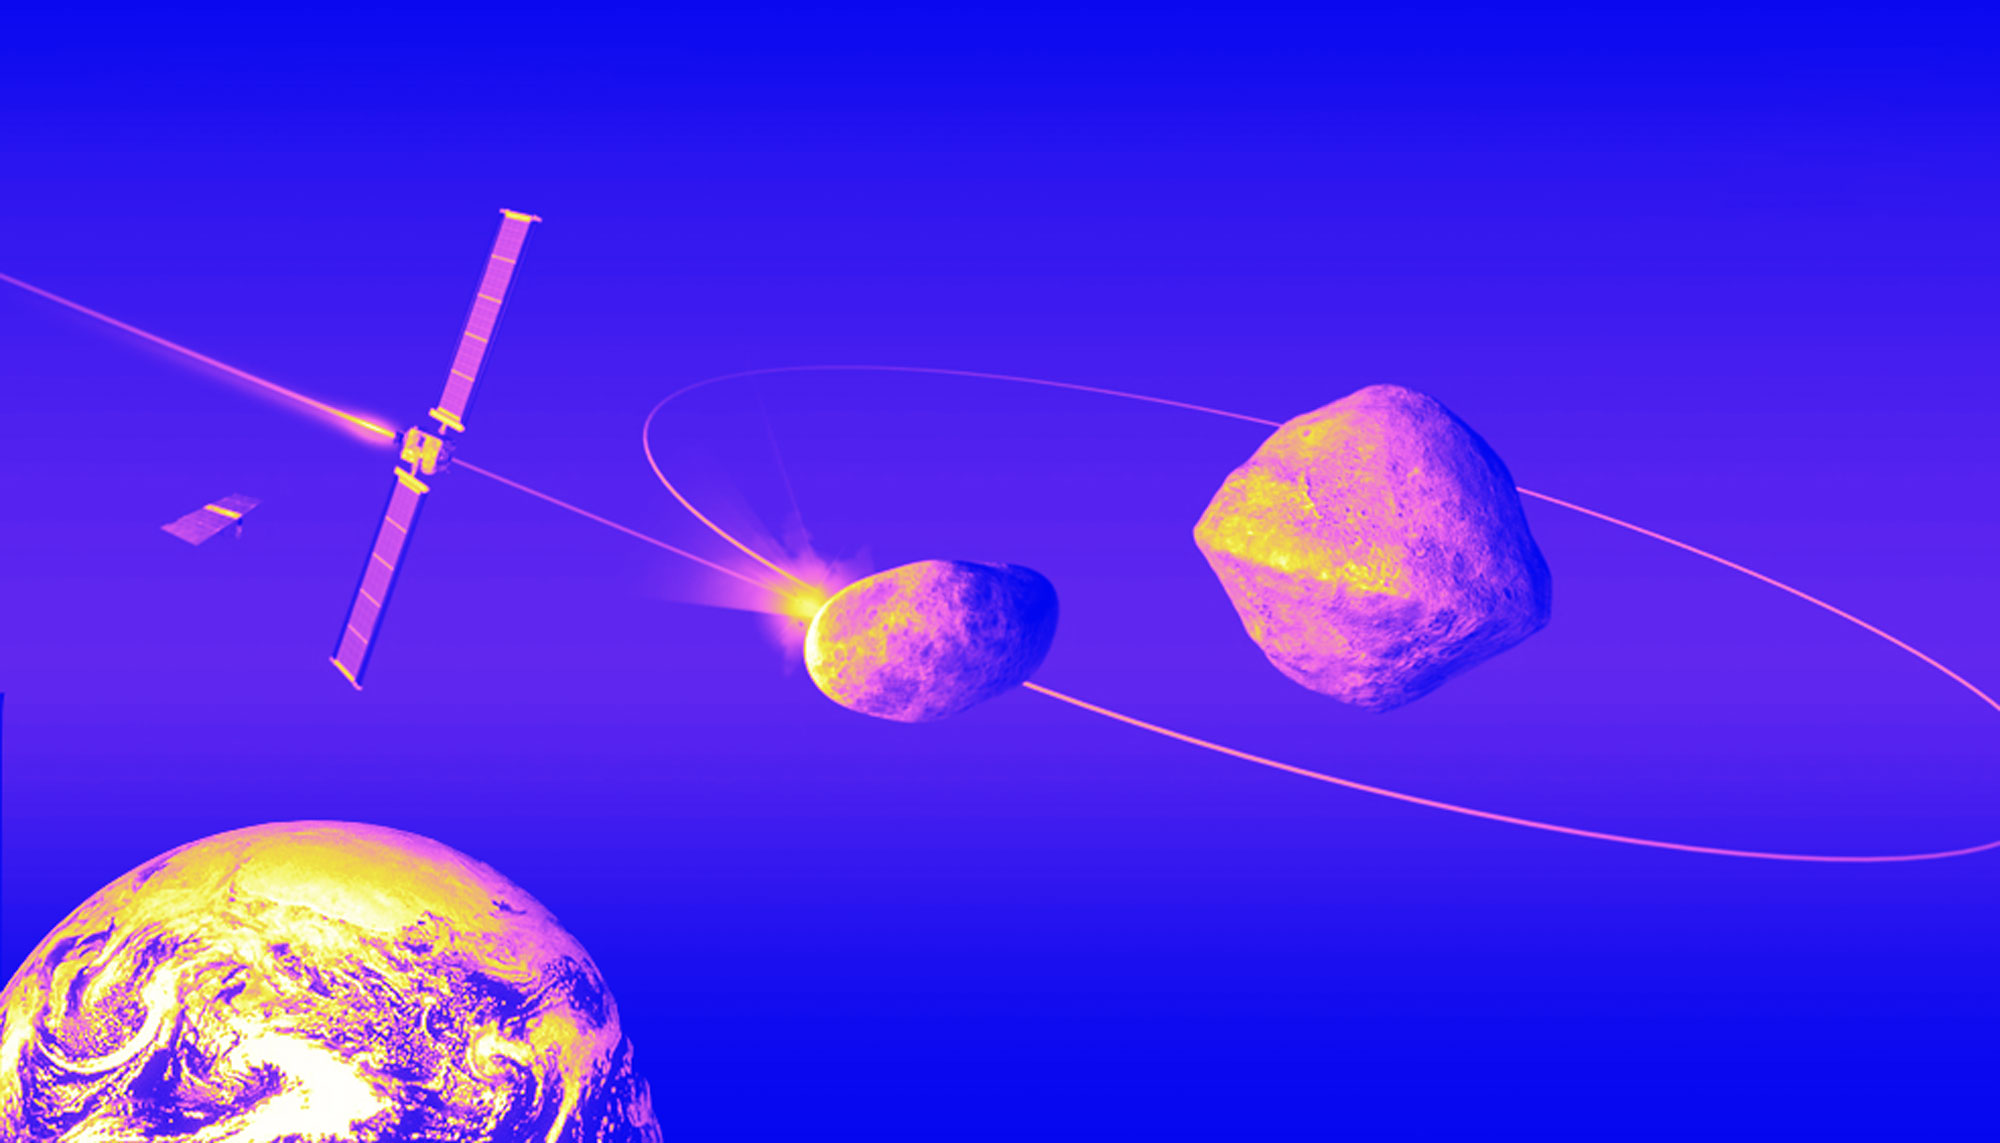 We're going to slam a spacecraft into an asteroid to try to deflect it |  MIT Technology Review